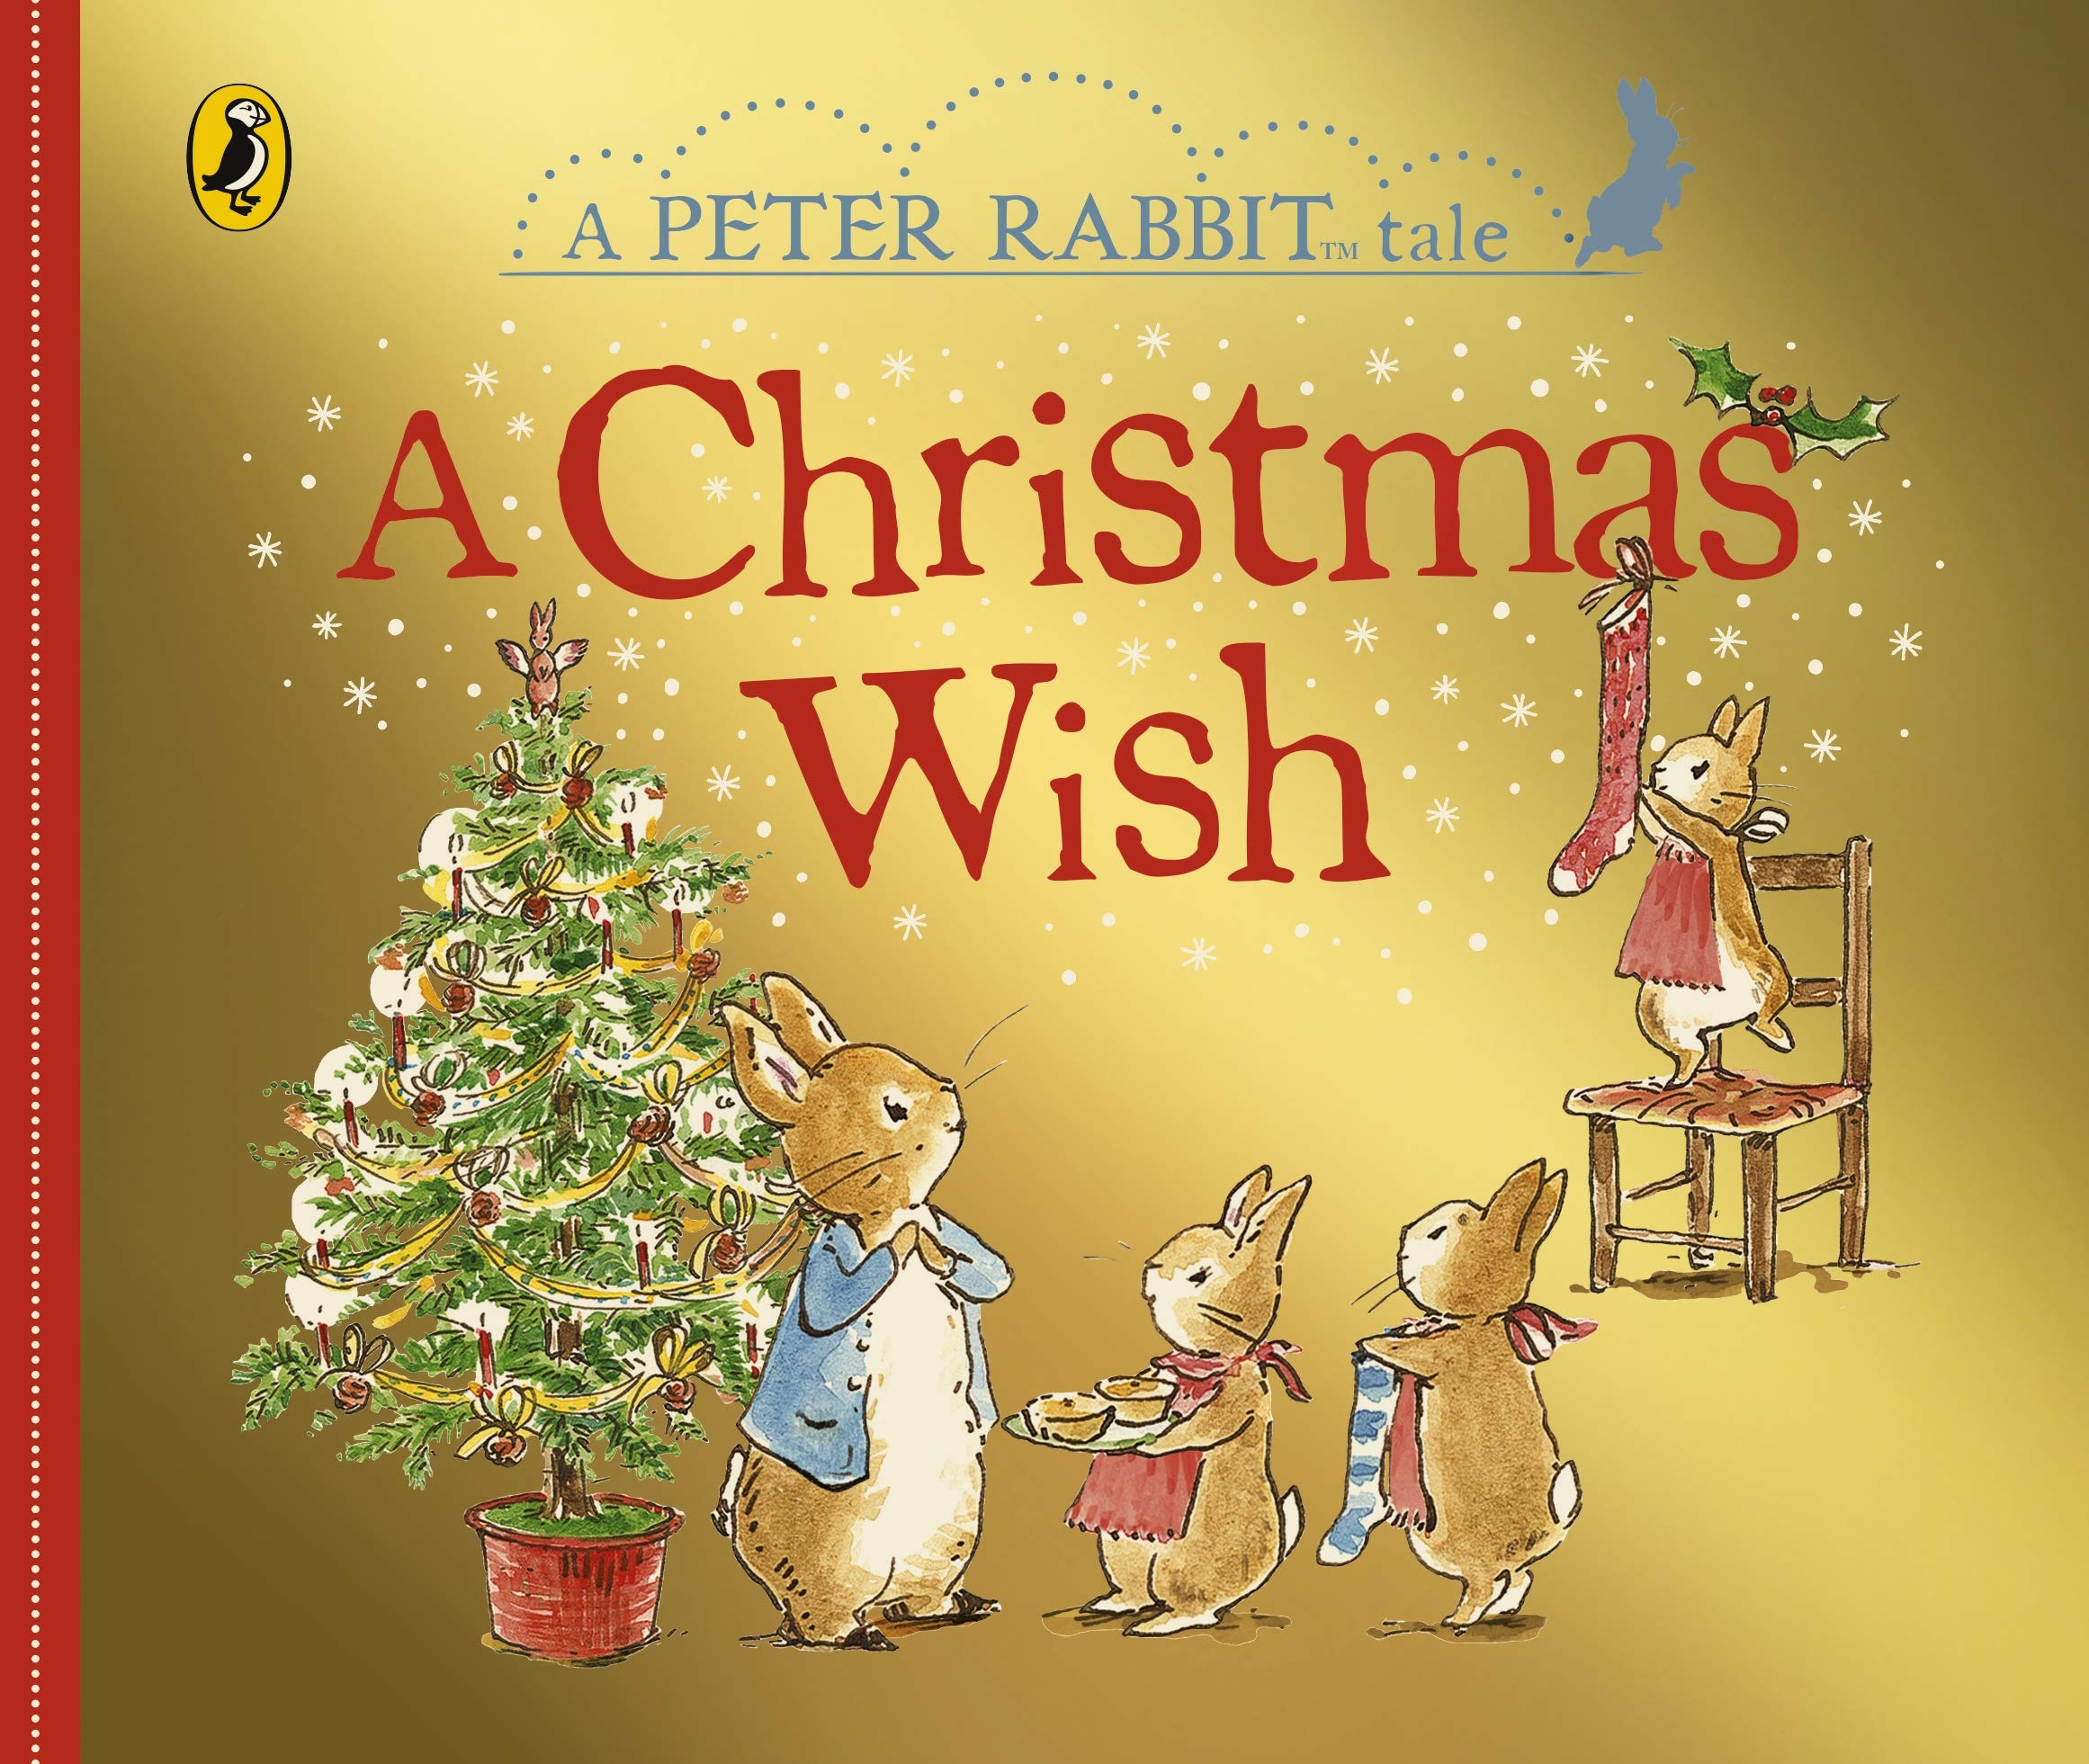 A Christmas Wish - A Peter Rabbit Tale - Buy Books at Louie Meets Lola